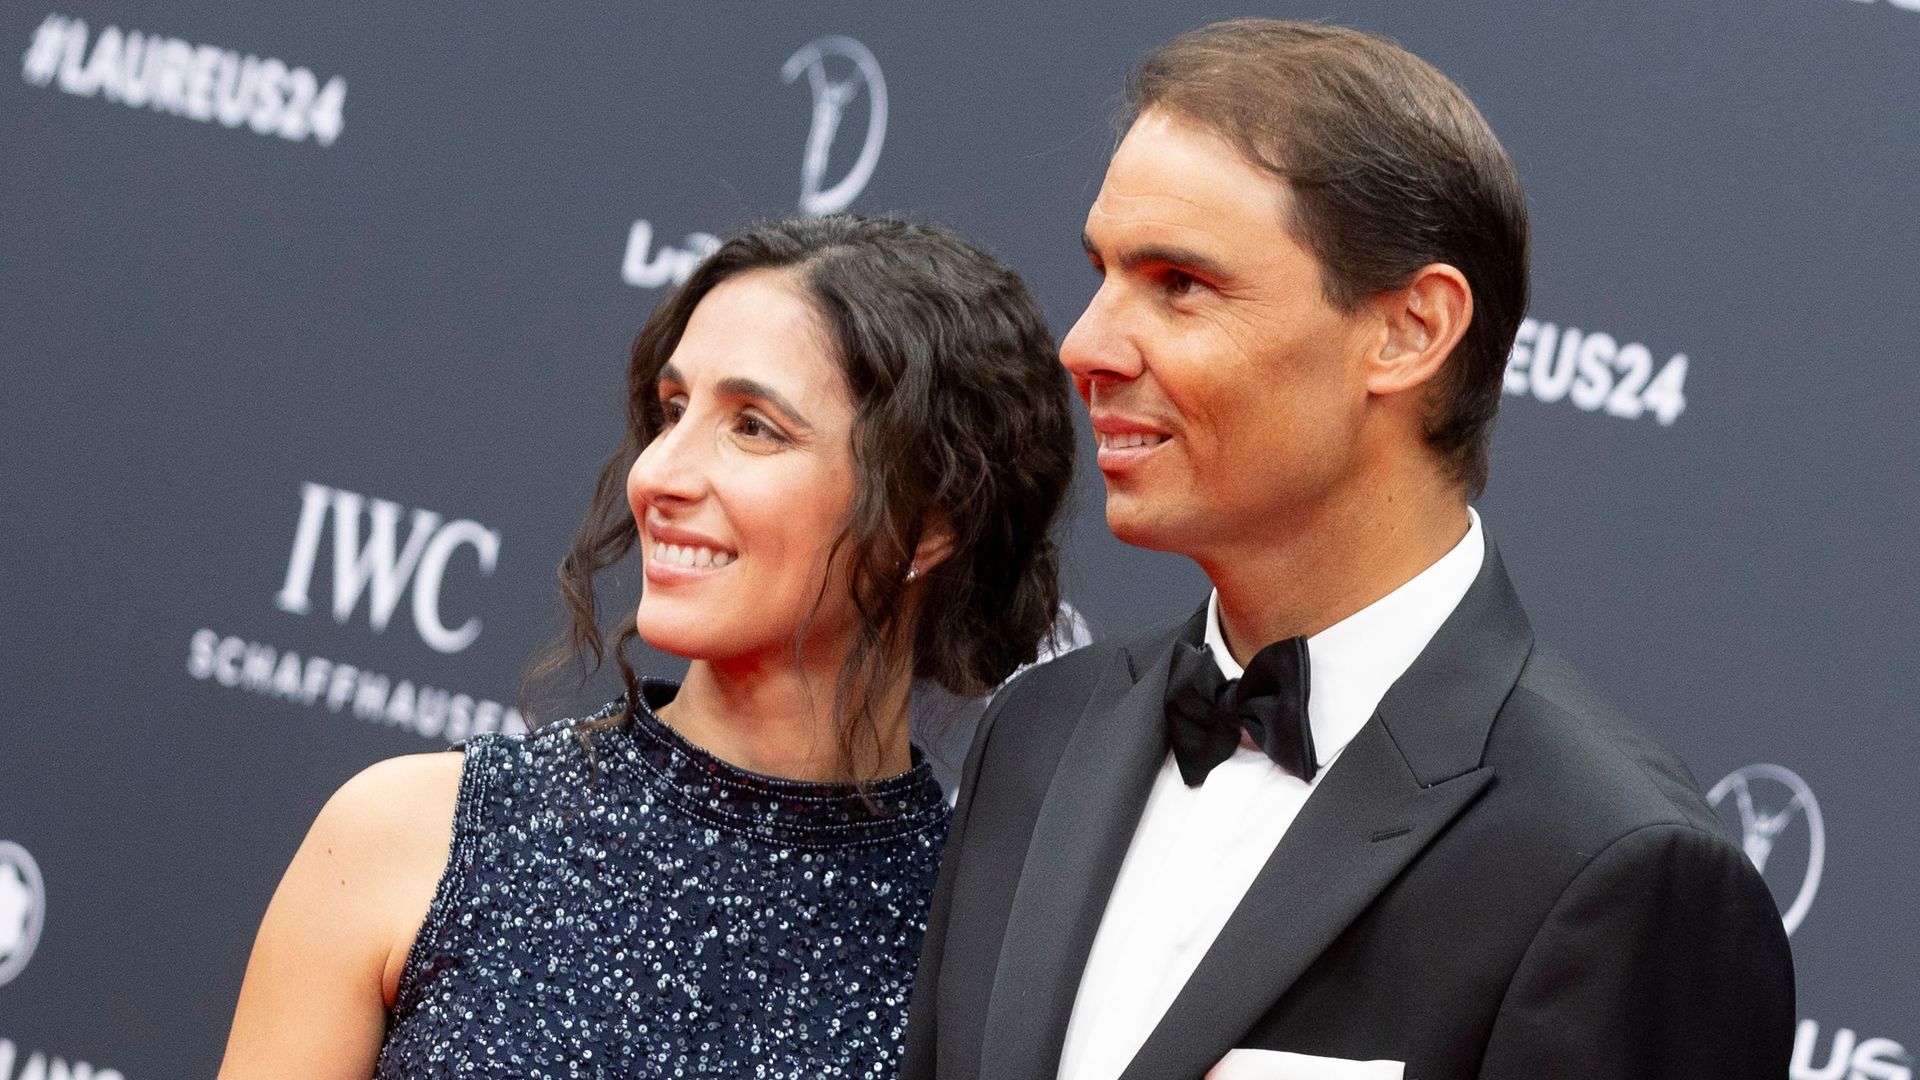 Besotted Rafael Nadal poses for incredibly rare photo with beautiful wife Maria Francisca Perello